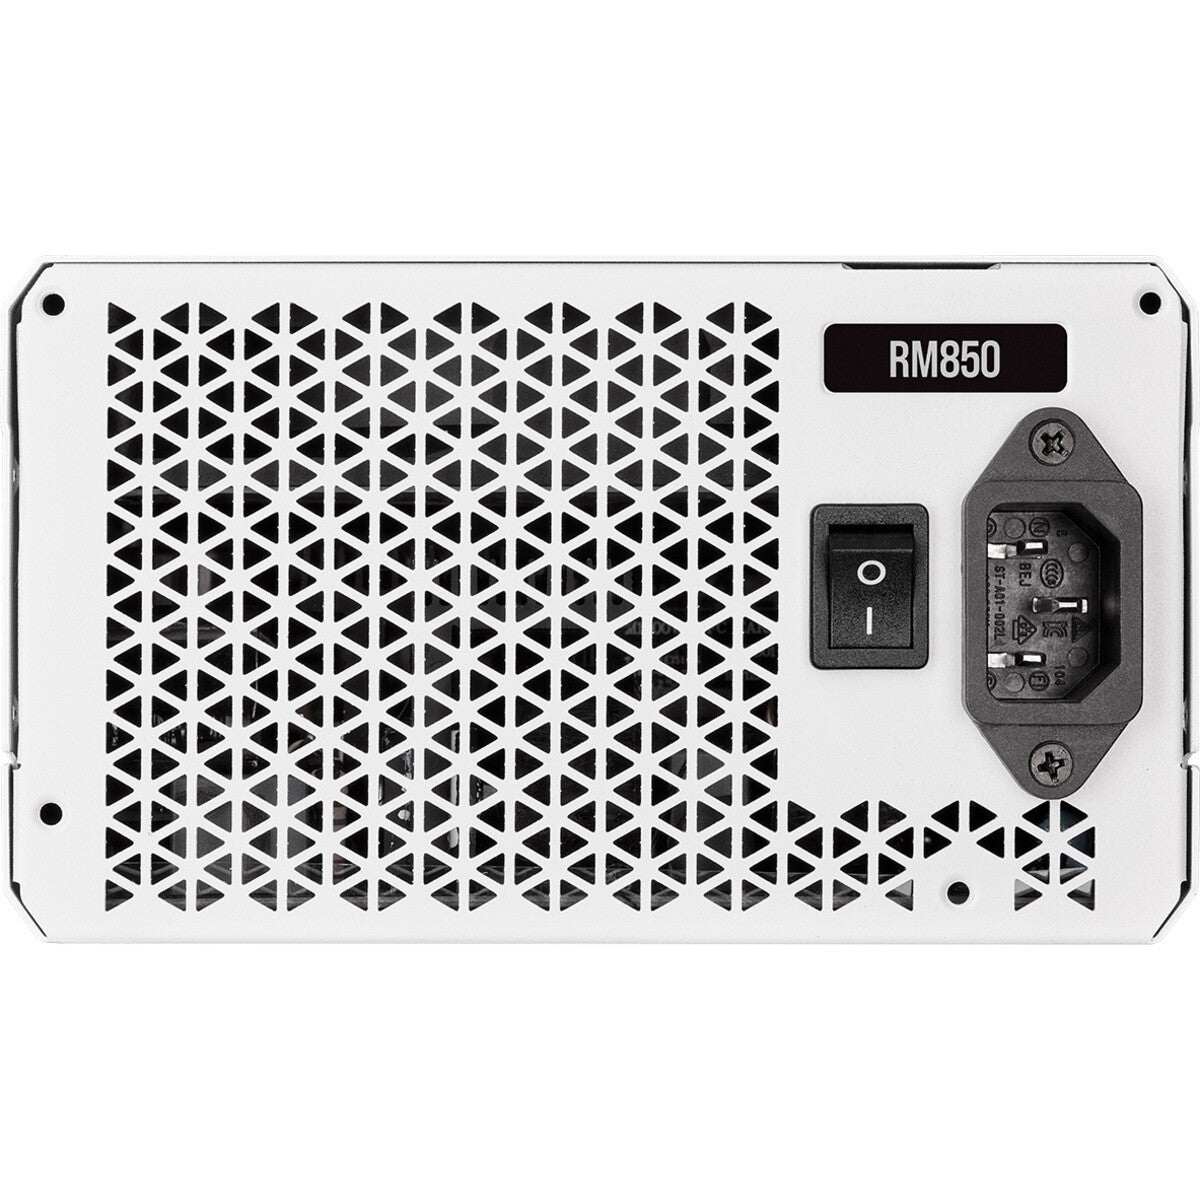 Corsair RM850 - 850W 80+ Gold Fully Modular Power Supply Unit in White